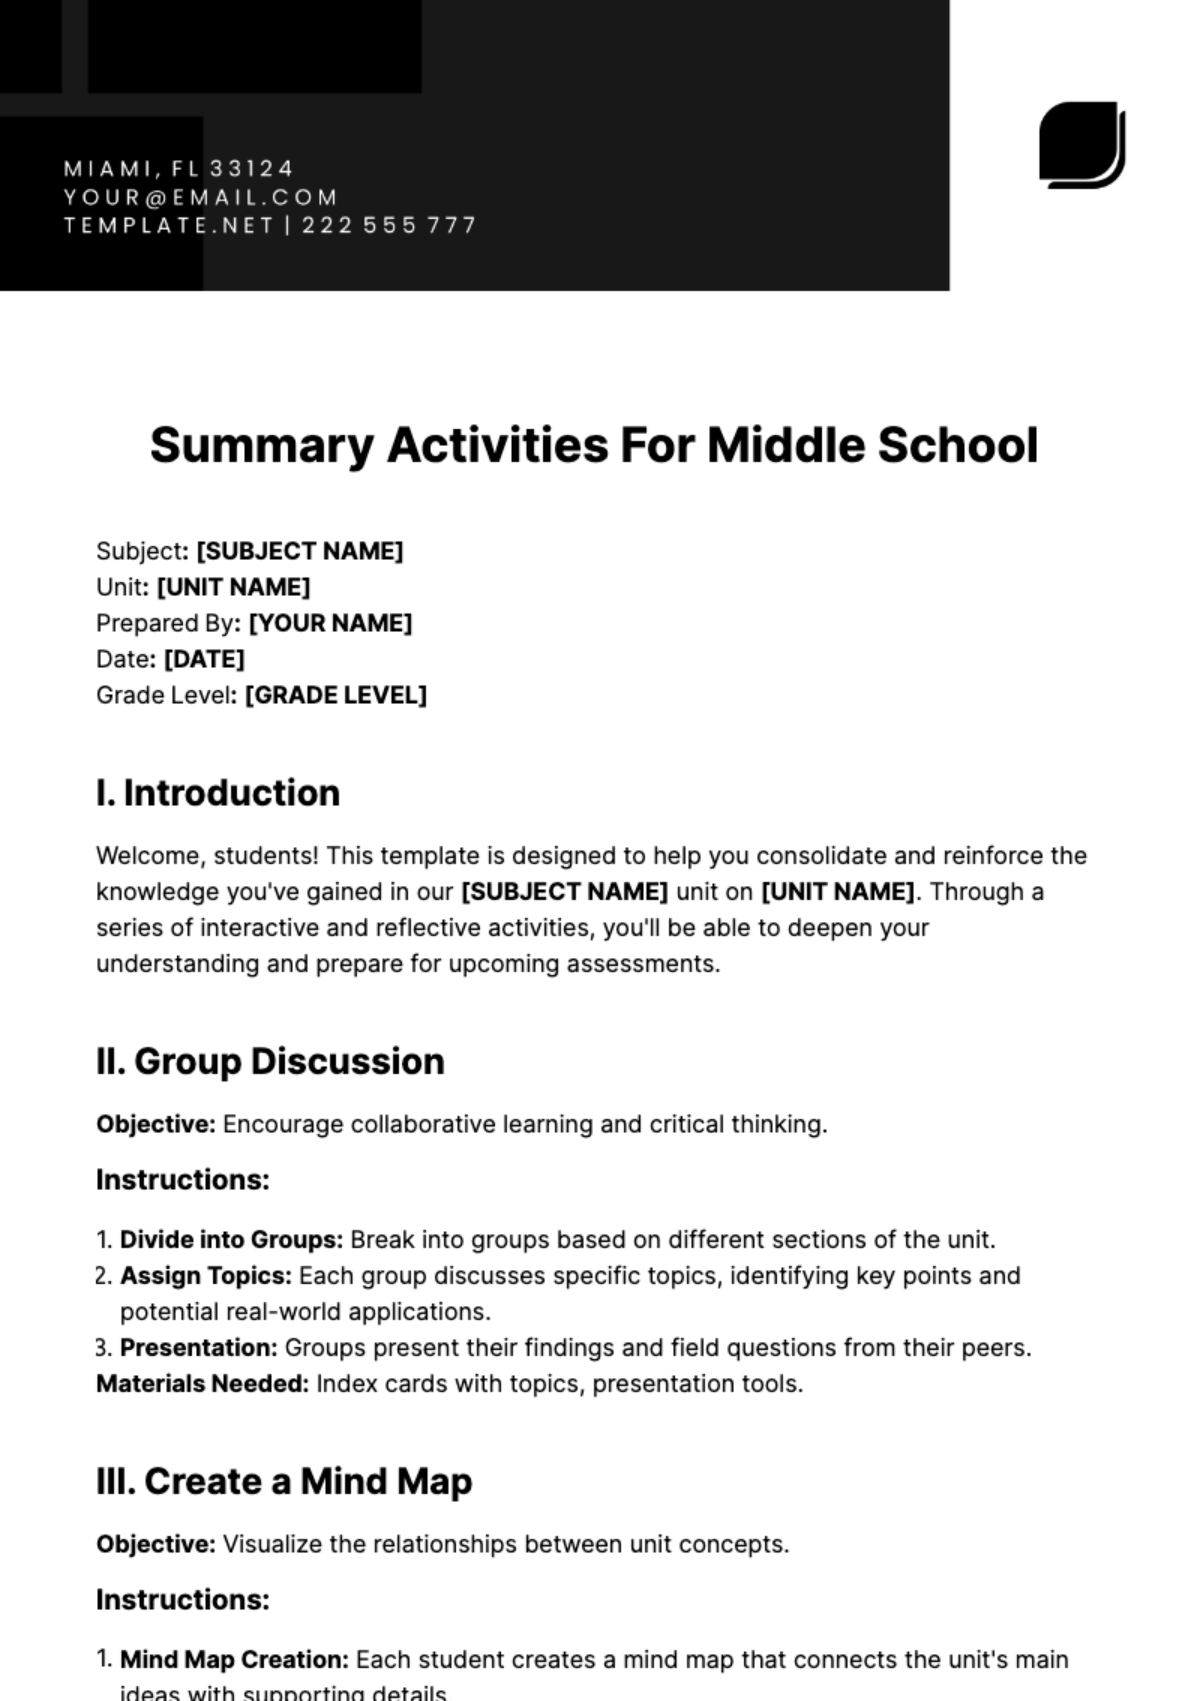 Summary Activities For Middle School Template